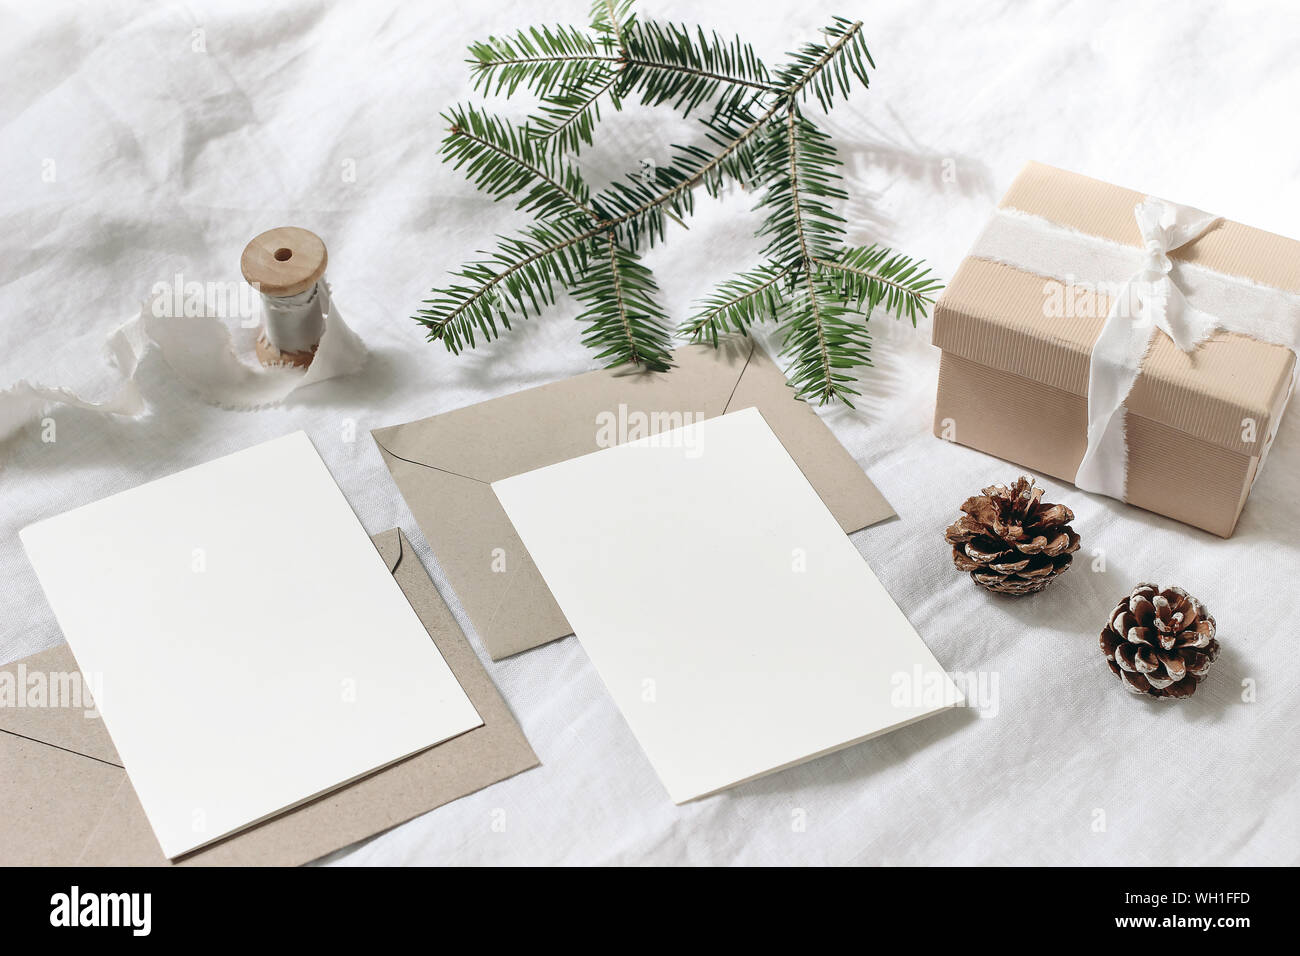 Christmas table, festive styled composition. Christmas greeting cards, envelopes mock-ups. Handmade gift box with silk ribbon, pine cones and fir tree Stock Photo